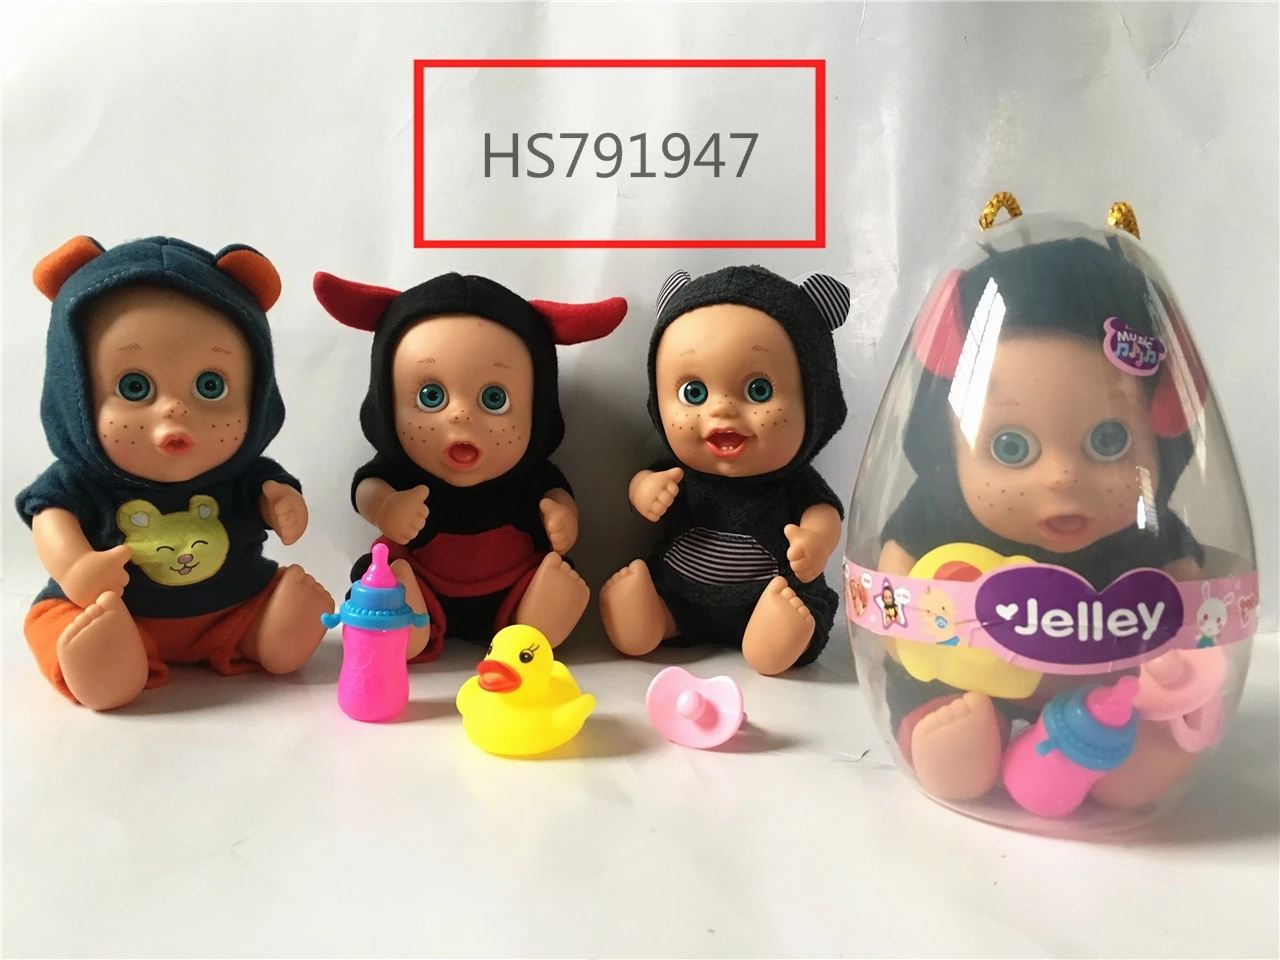 HS791947, Huwsin Toys, 9inch doll, IC, 3mixed